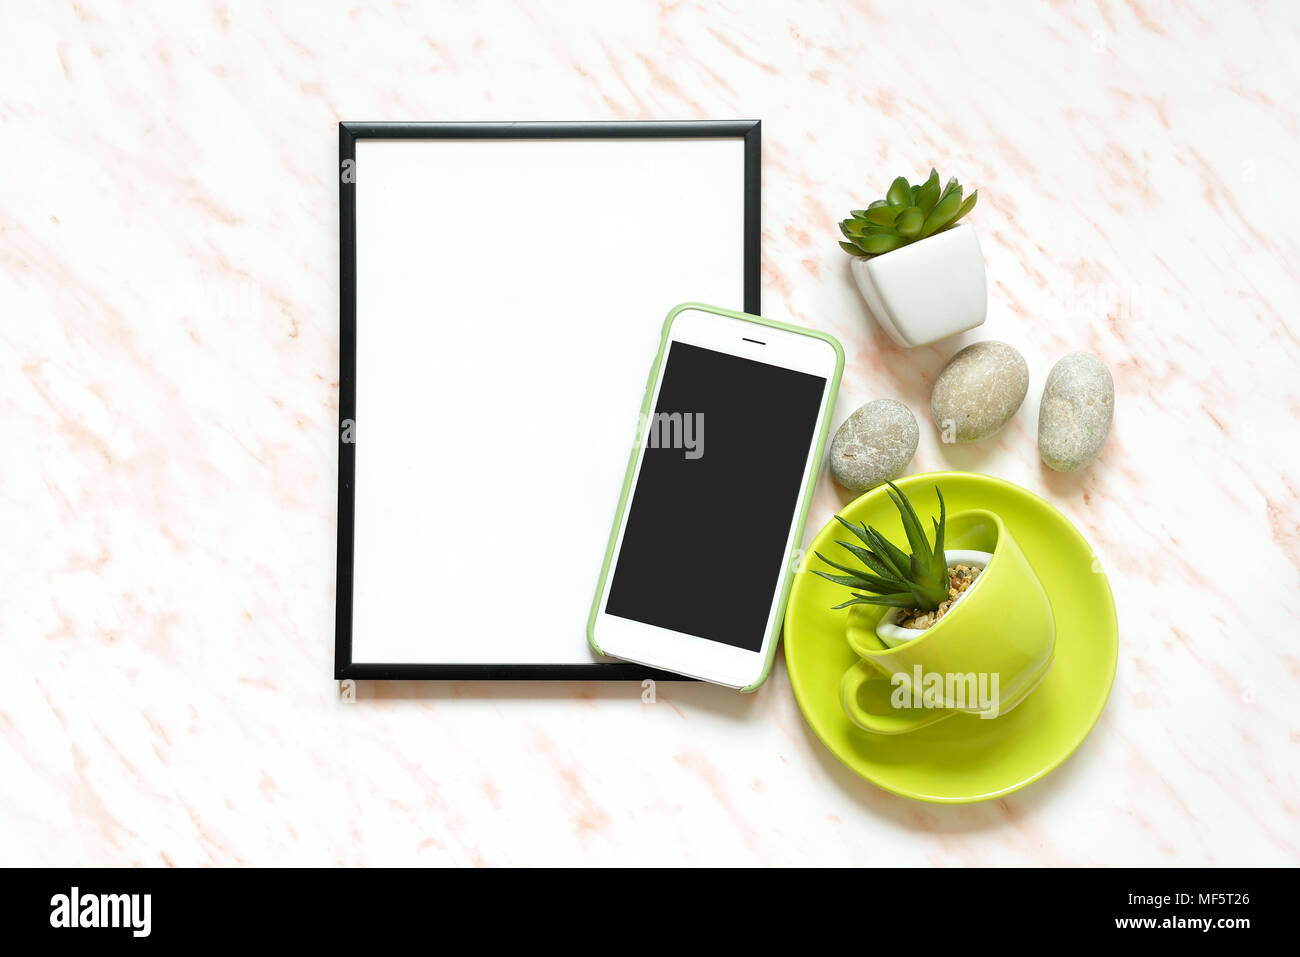 Creative Flat lay marble desk with white empty frame for text, phone, cup, stones and succulents background Stock Photo